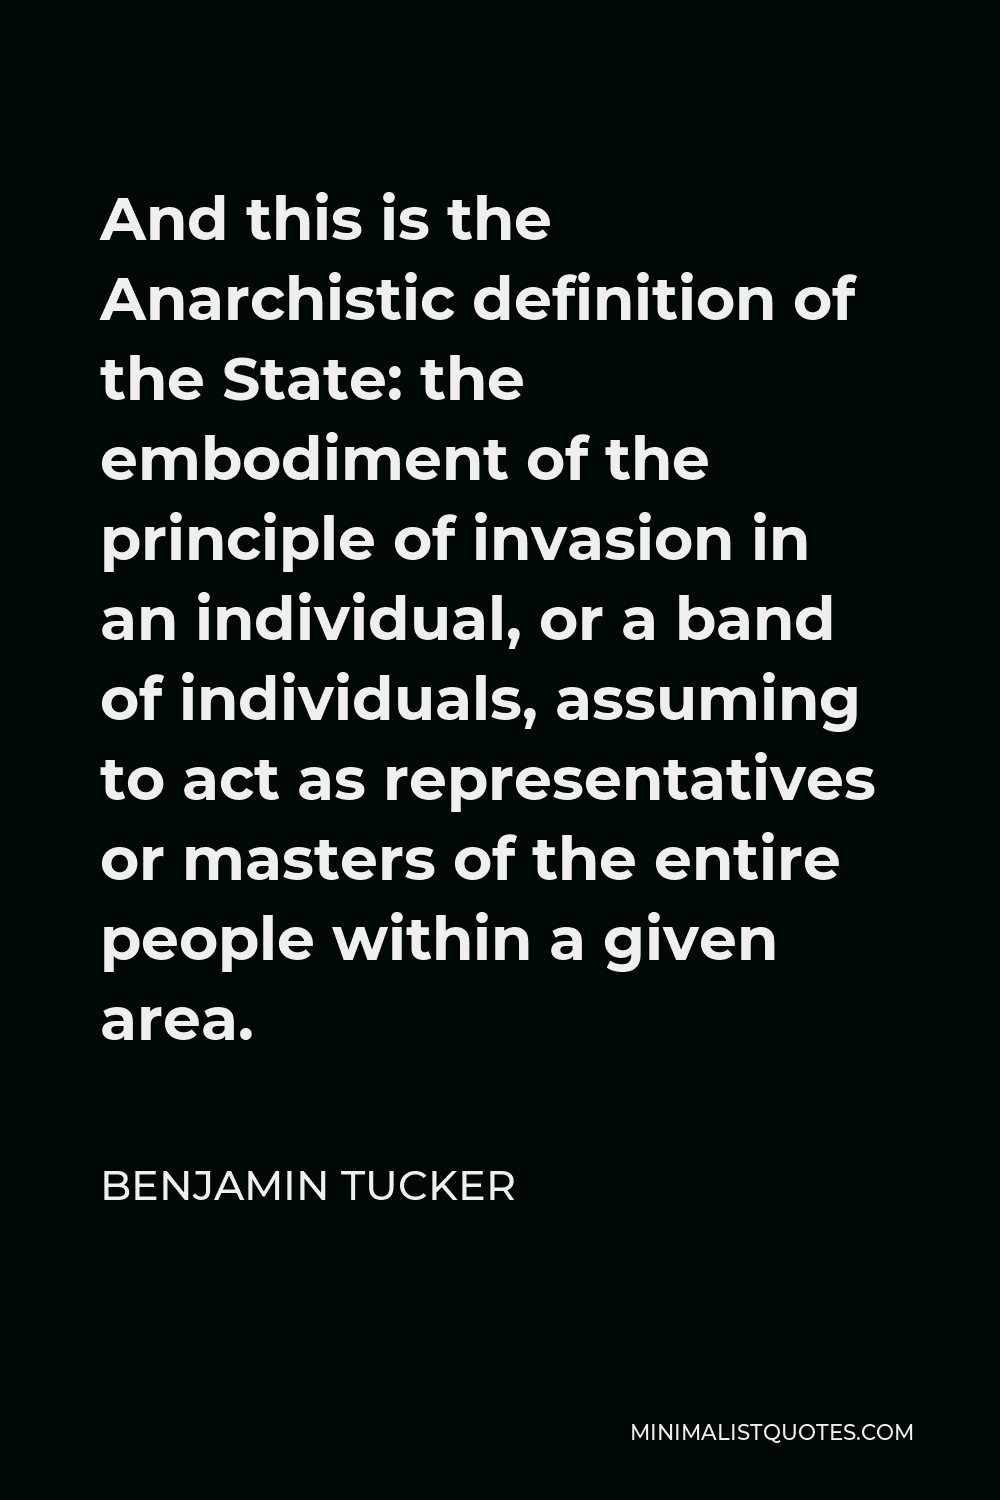 Benjamin Tucker Quote - And this is the Anarchistic definition of the State: the embodiment of the principle of invasion in an individual, or a band of individuals, assuming to act as representatives or masters of the entire people within a given area.